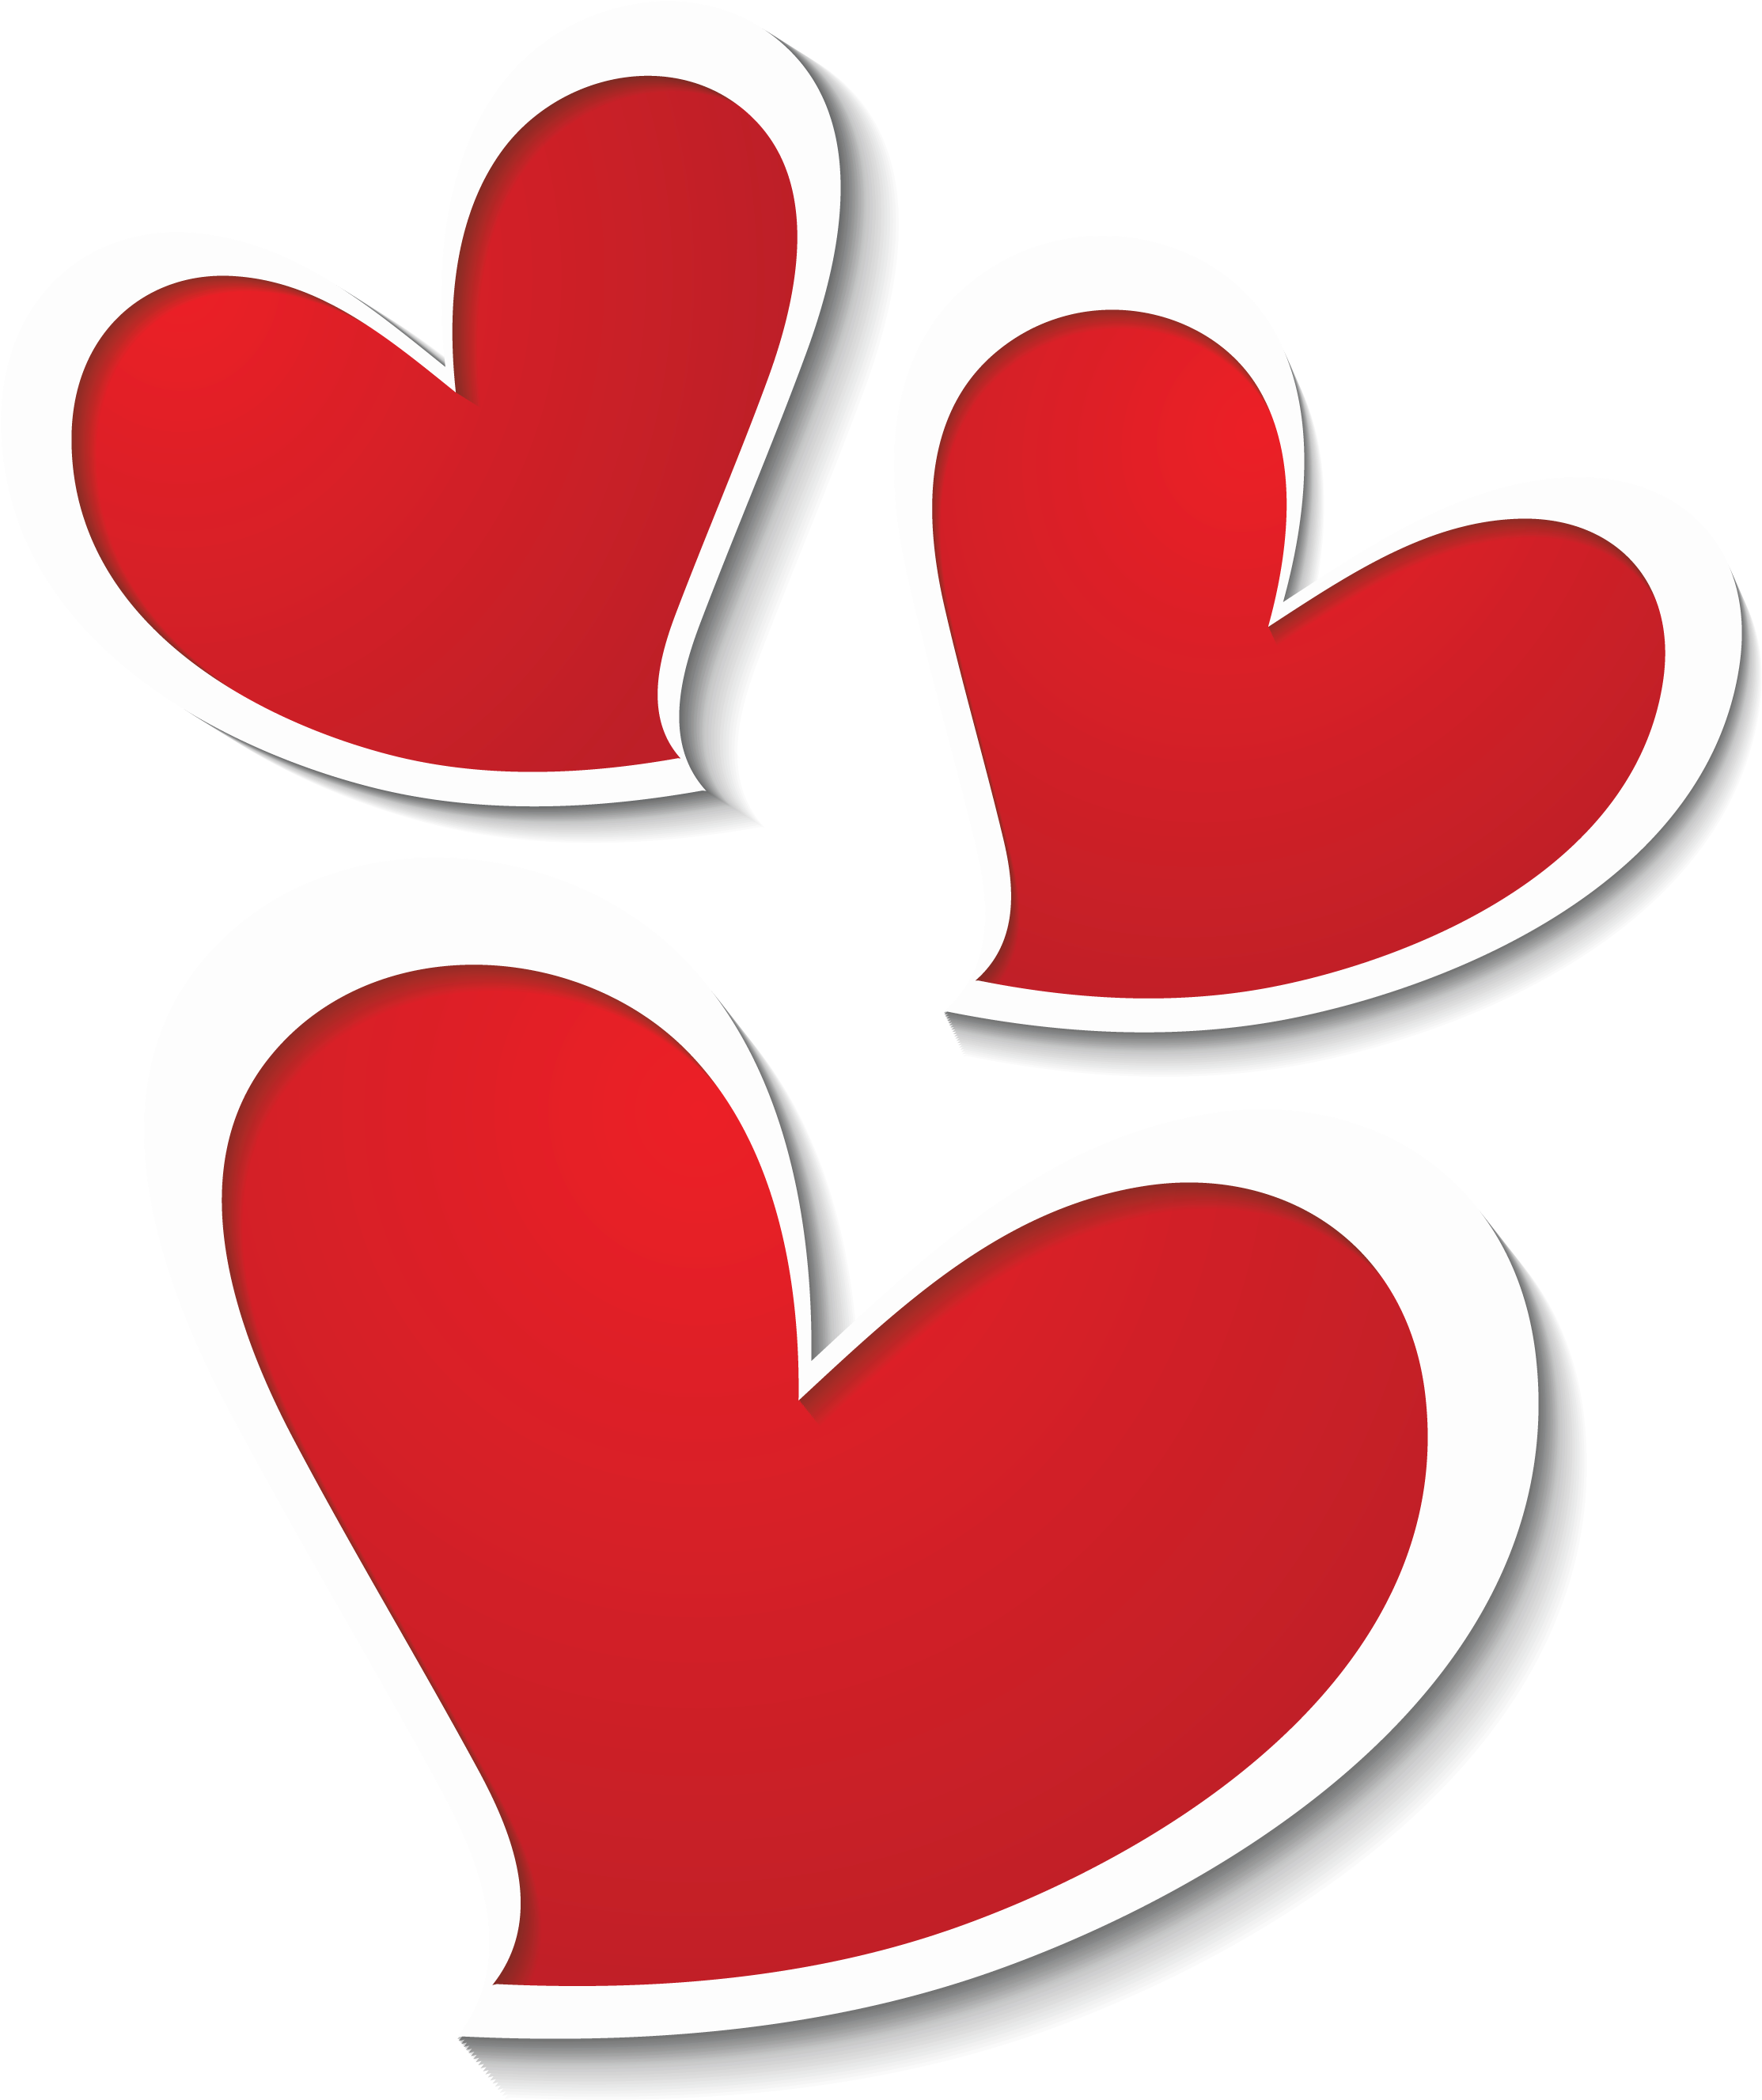 Three Hearts Decor Png Clipart Picture - Good Night My Sweetheart (2500x3235)